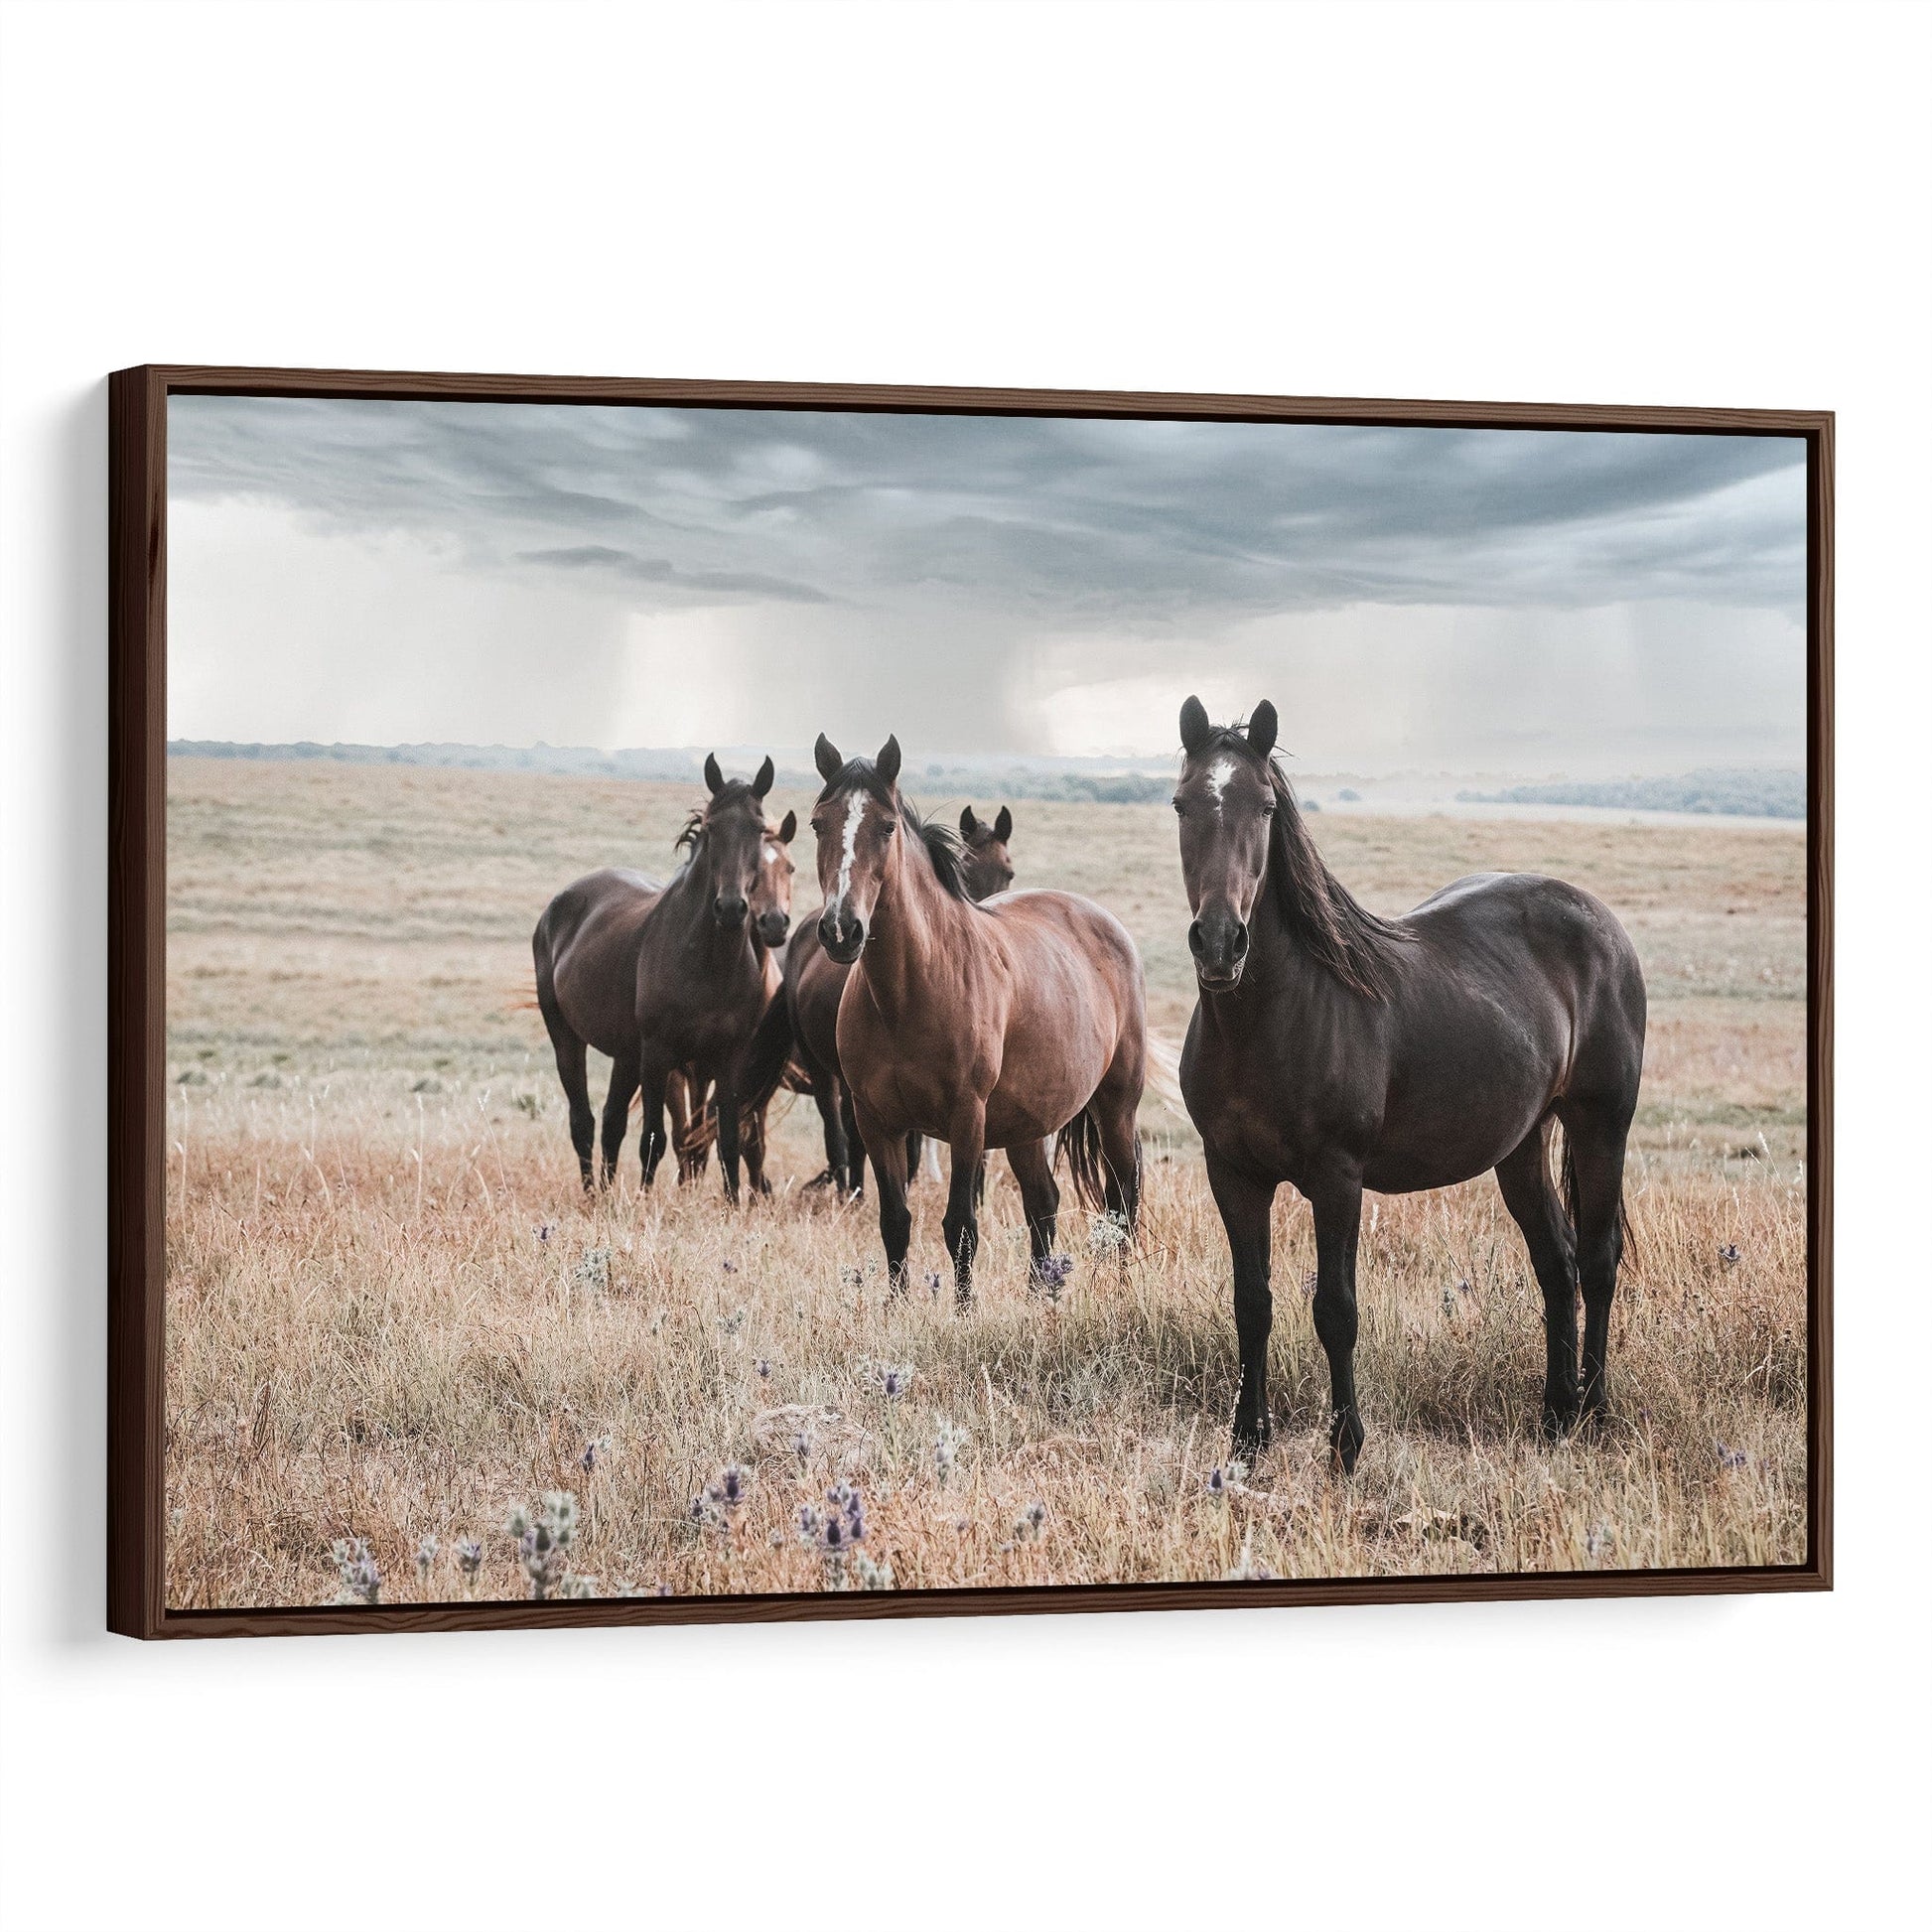 Wild Horses and Stormy Sky Wall Decor Canvas-Walnut Frame / 12 x 18 Inches Wall Art Teri James Photography